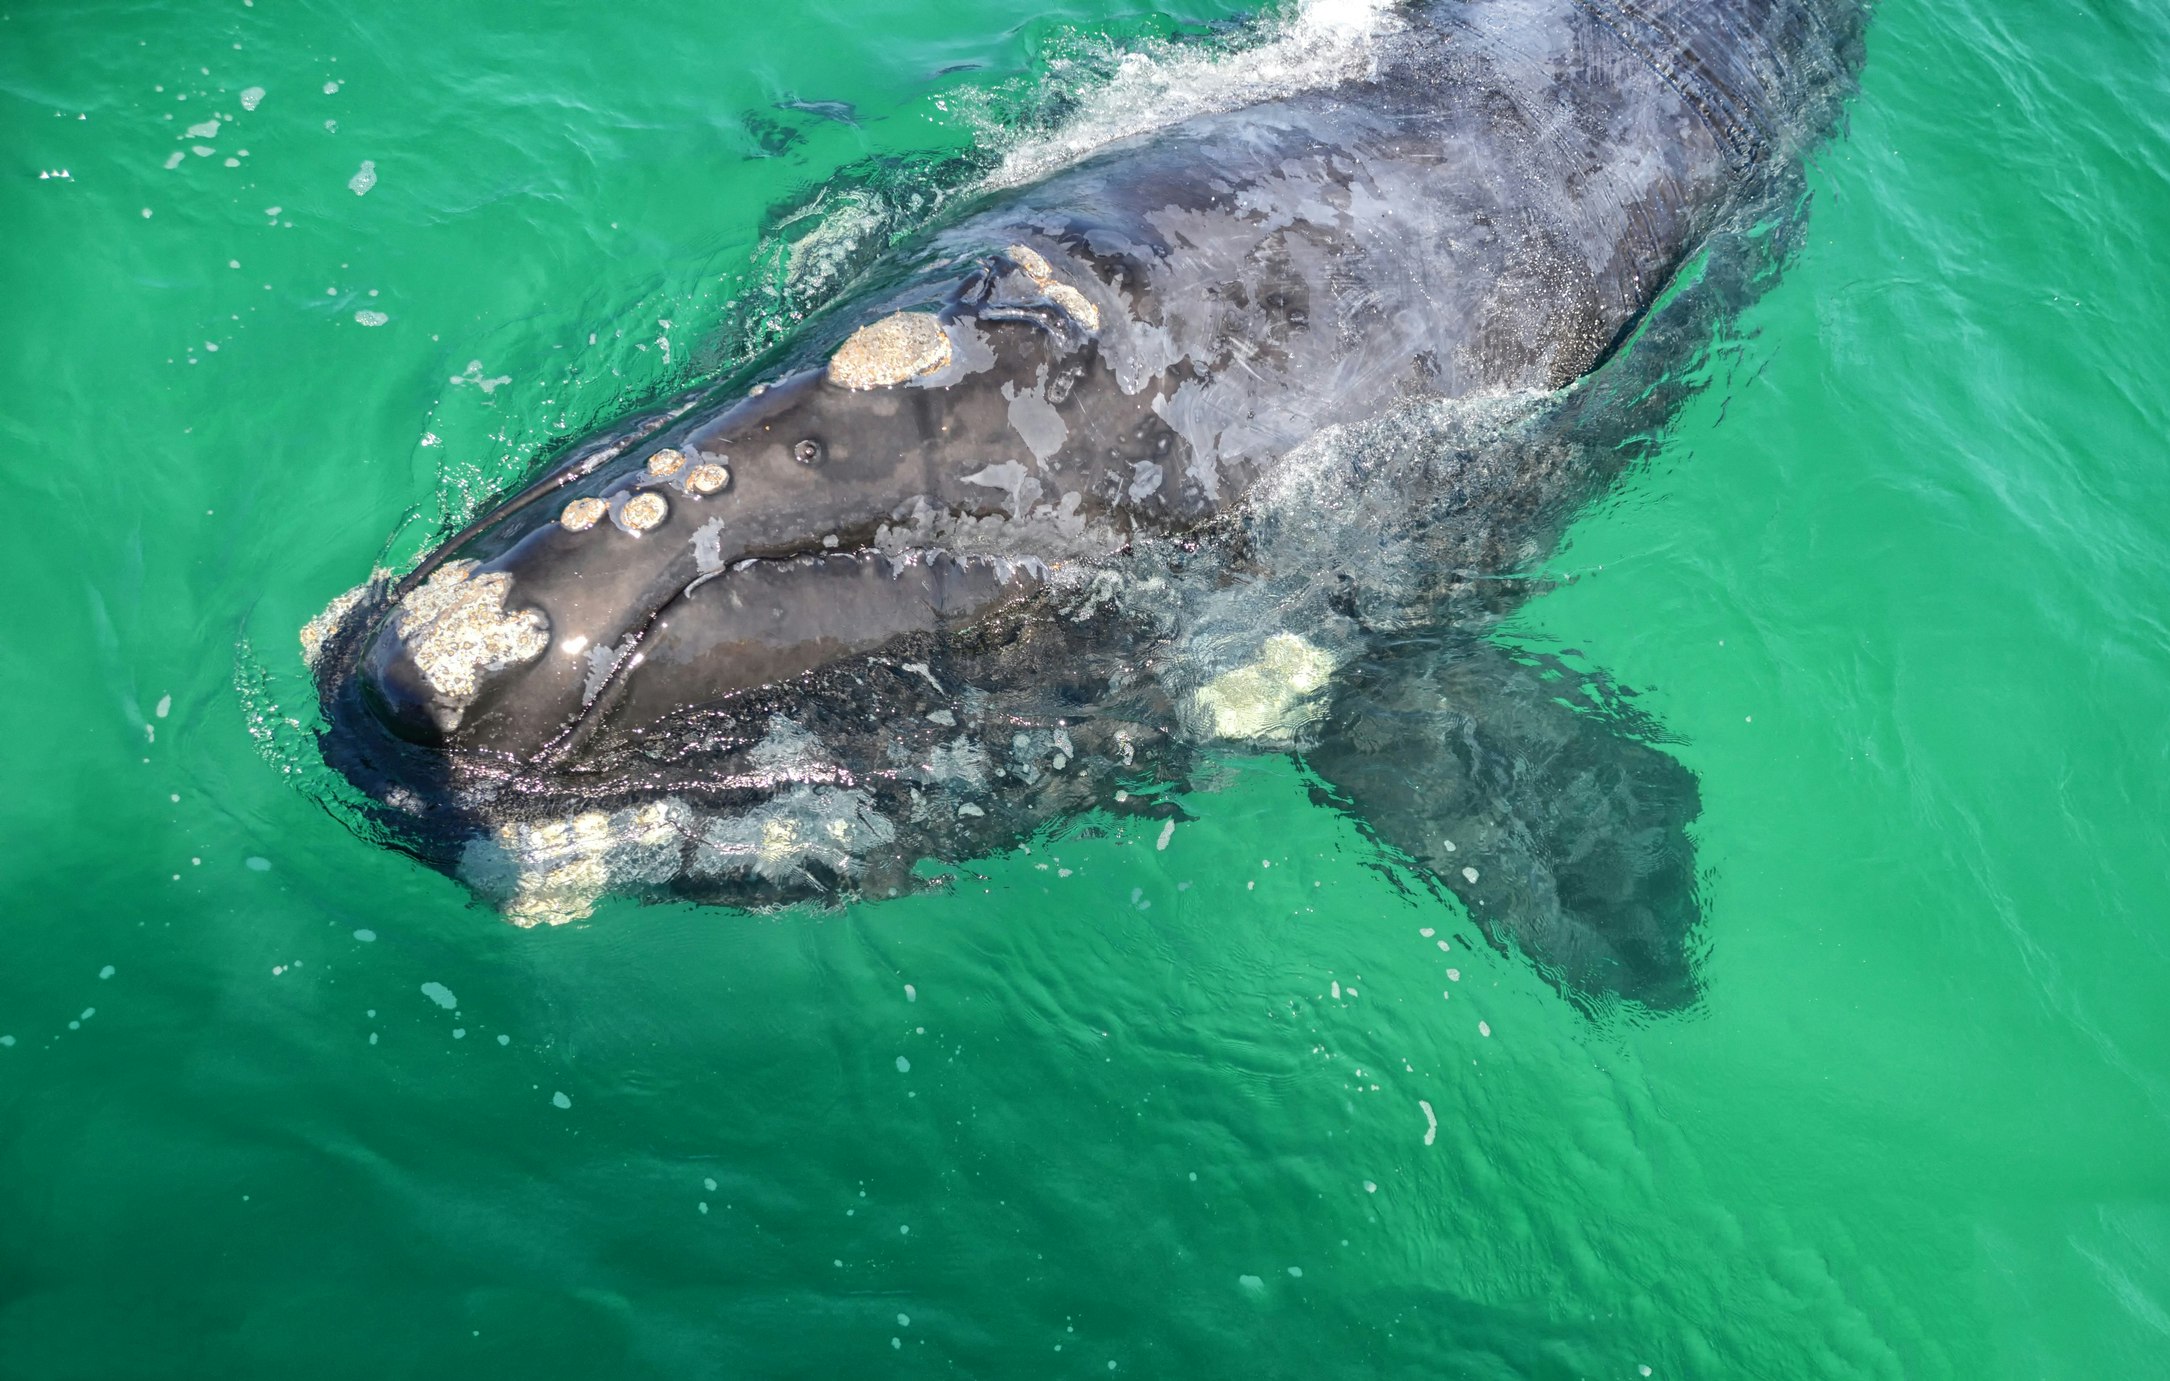 A closeup of a curious juvenile Southern Right Whale in the water